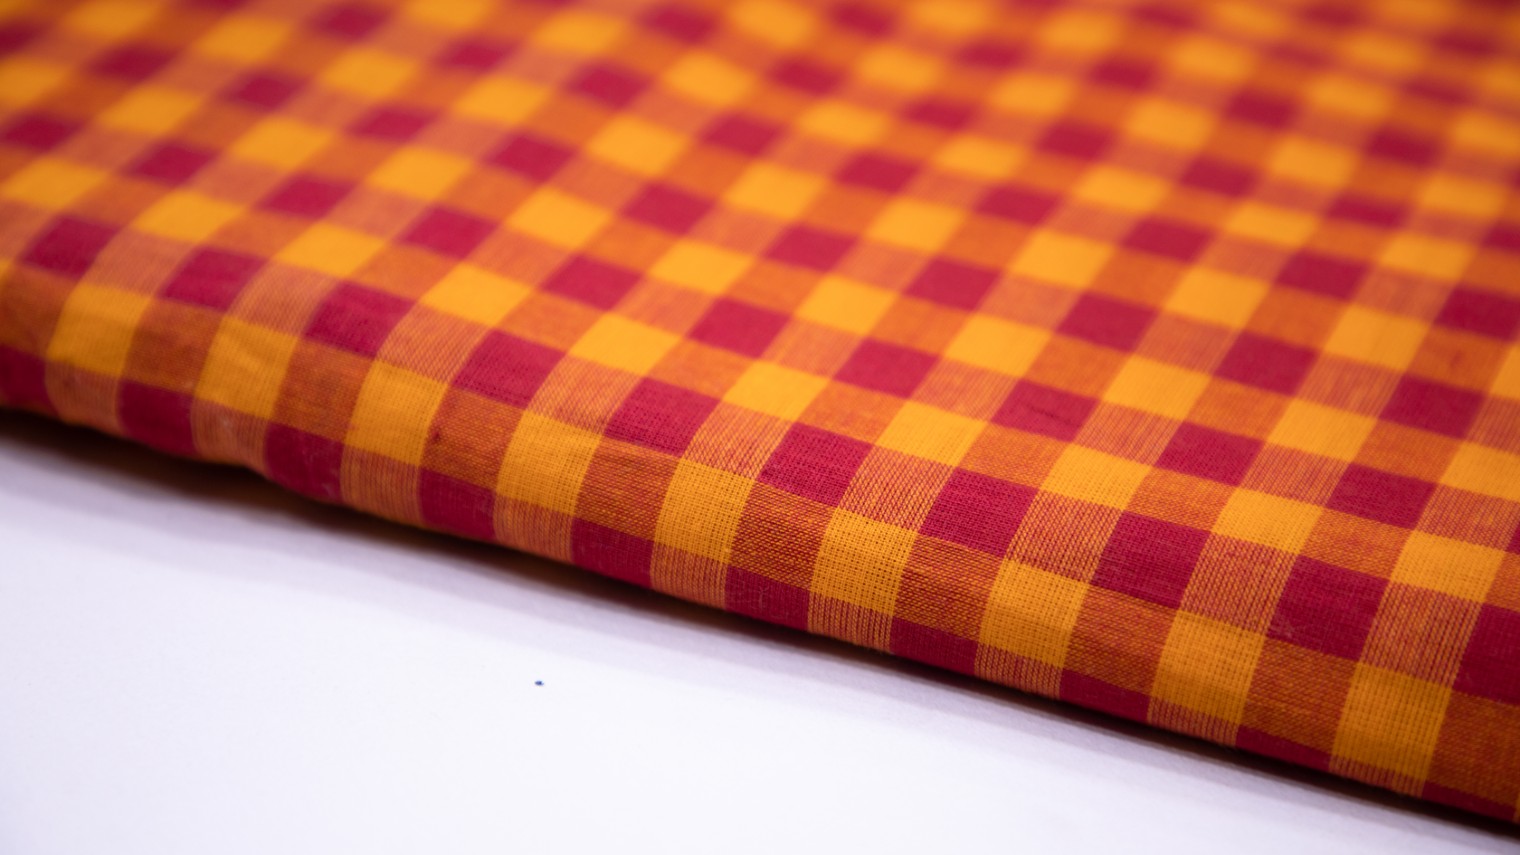 SUN ORANGE COLOR SOUTH COTTON HANDLOOM RED CHEX WEAVE FABRIC - 4239